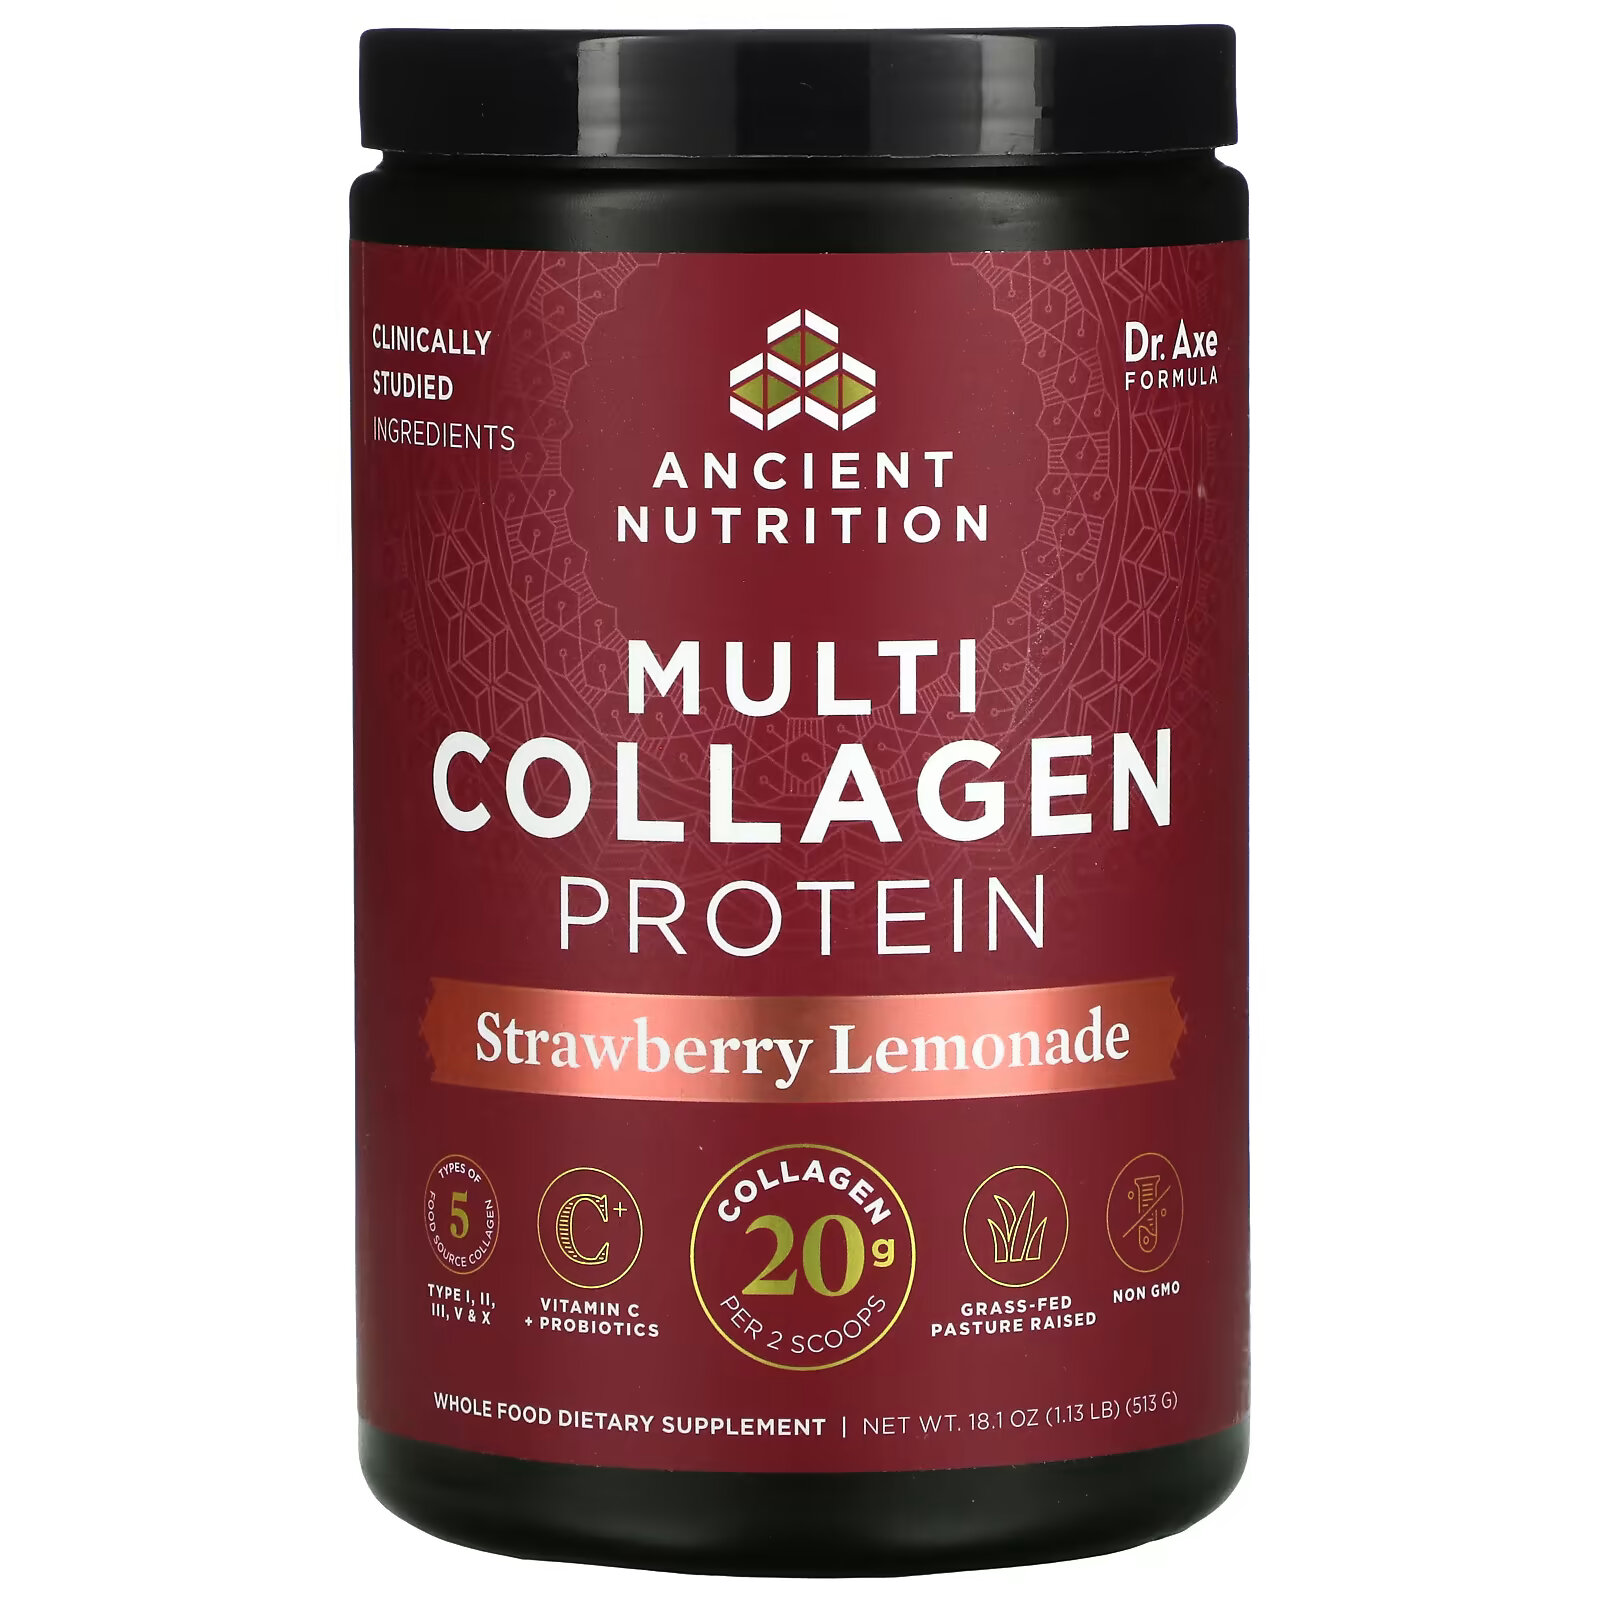 Dr. Axe / Ancient Nutrition, Multi Collagen Protein, Strawberry Lemonade, 1.18 lbs (535.5 g) dr axe ancient nutrition multi collagen protein strawberry lemonade 1 18 lbs 535 5 g